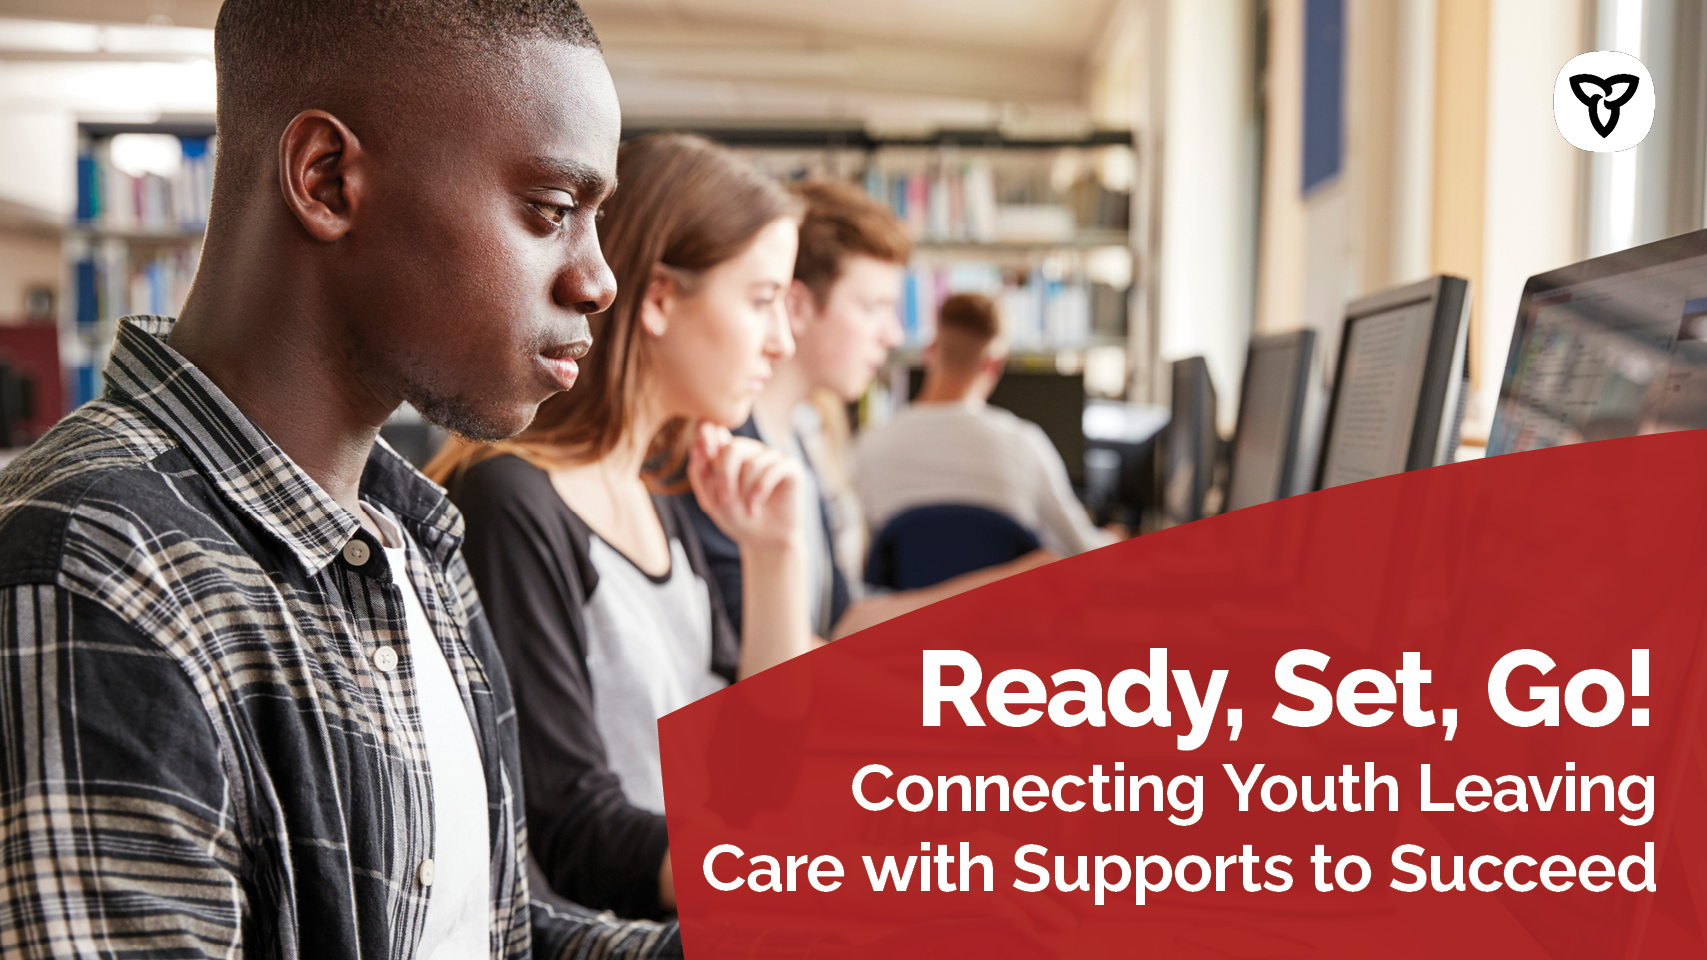 Ontario Connecting Youth Leaving Care with Supports to Succeed